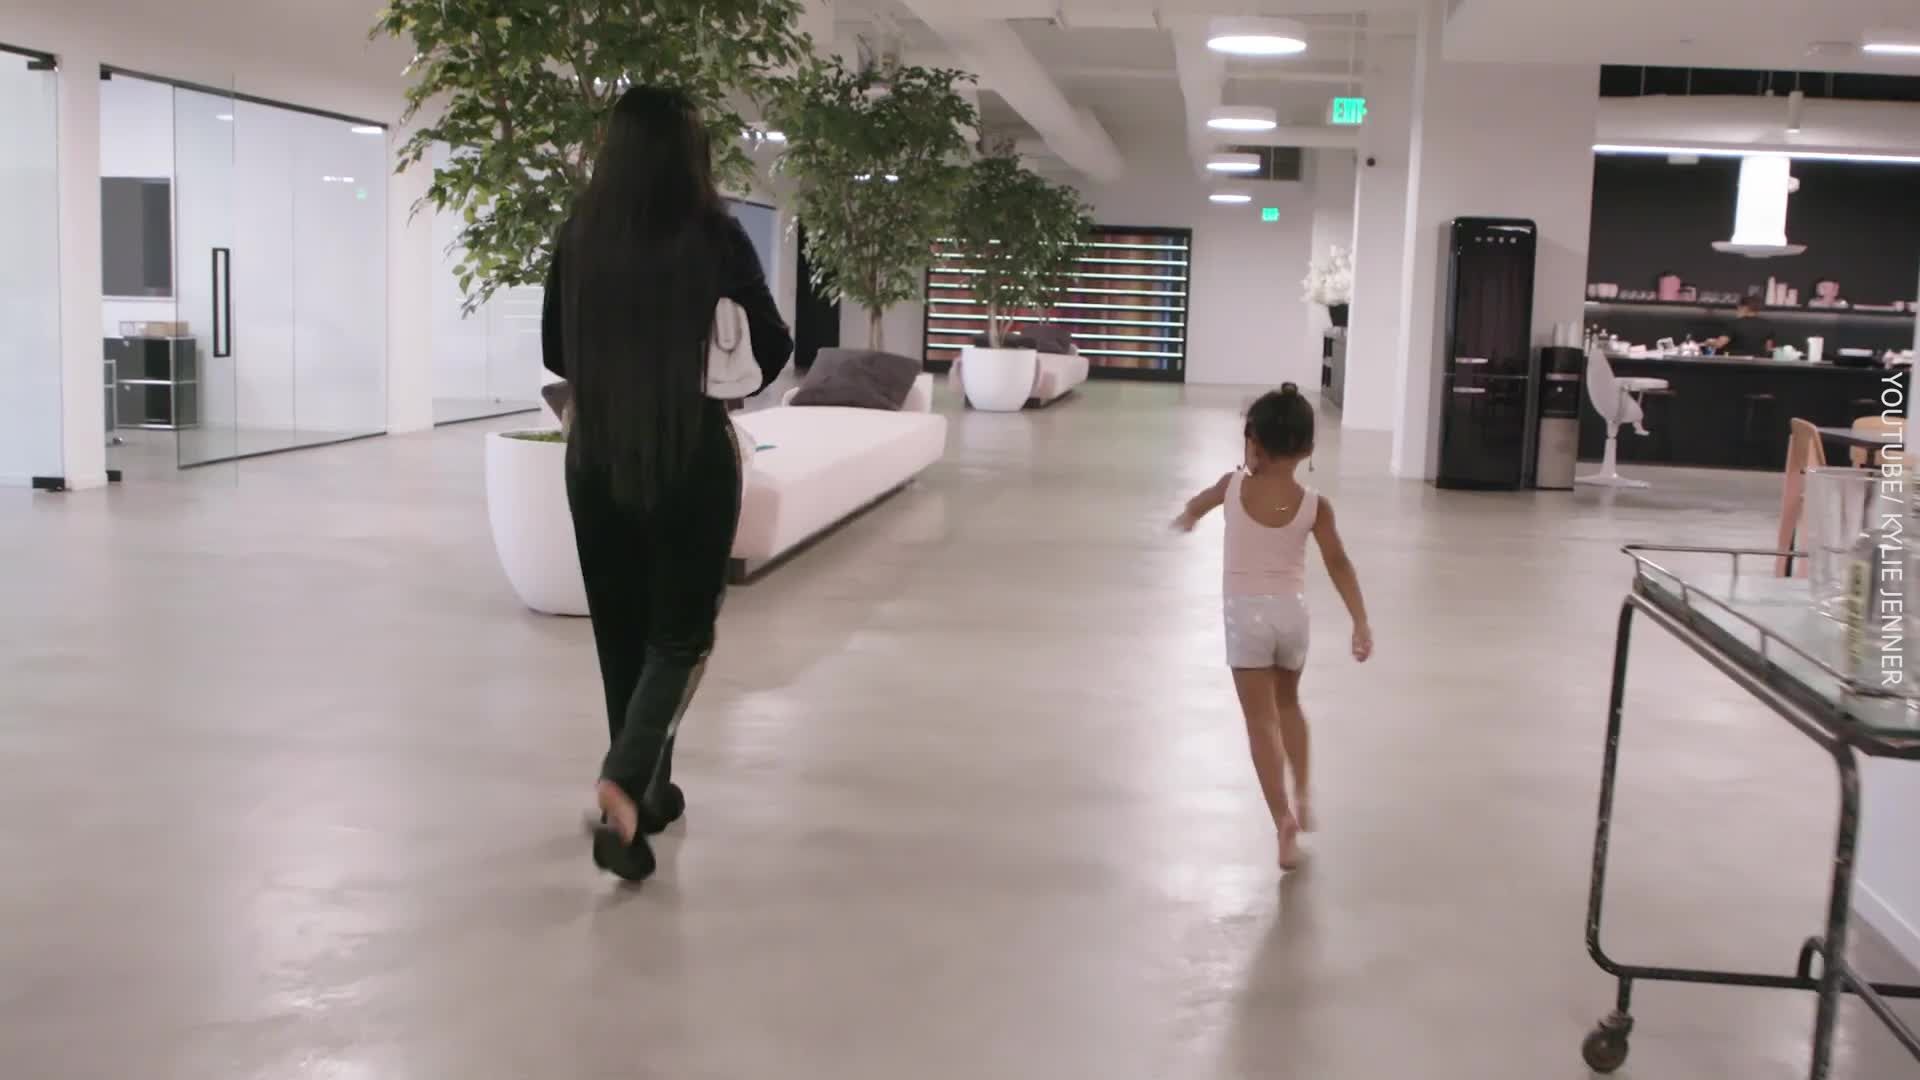 Kylie Jenner just showed fans round Stormi's office at Kylie Cosmetics HQ